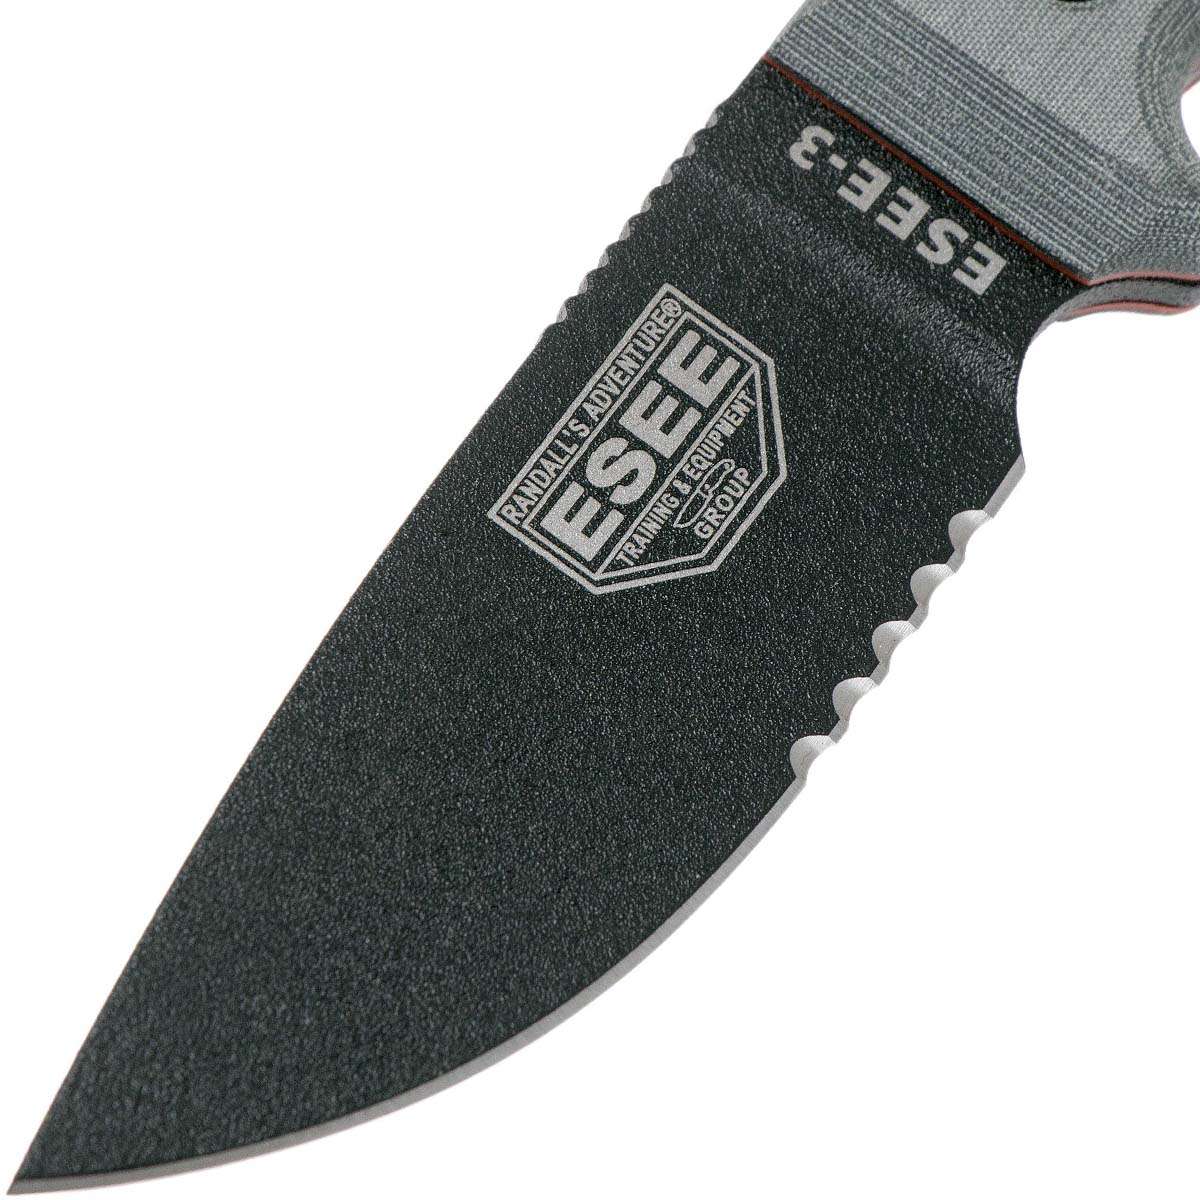 ESEE 3S Knife with Modified Pommel & Coyote Tan Sheath ESEE-3SM